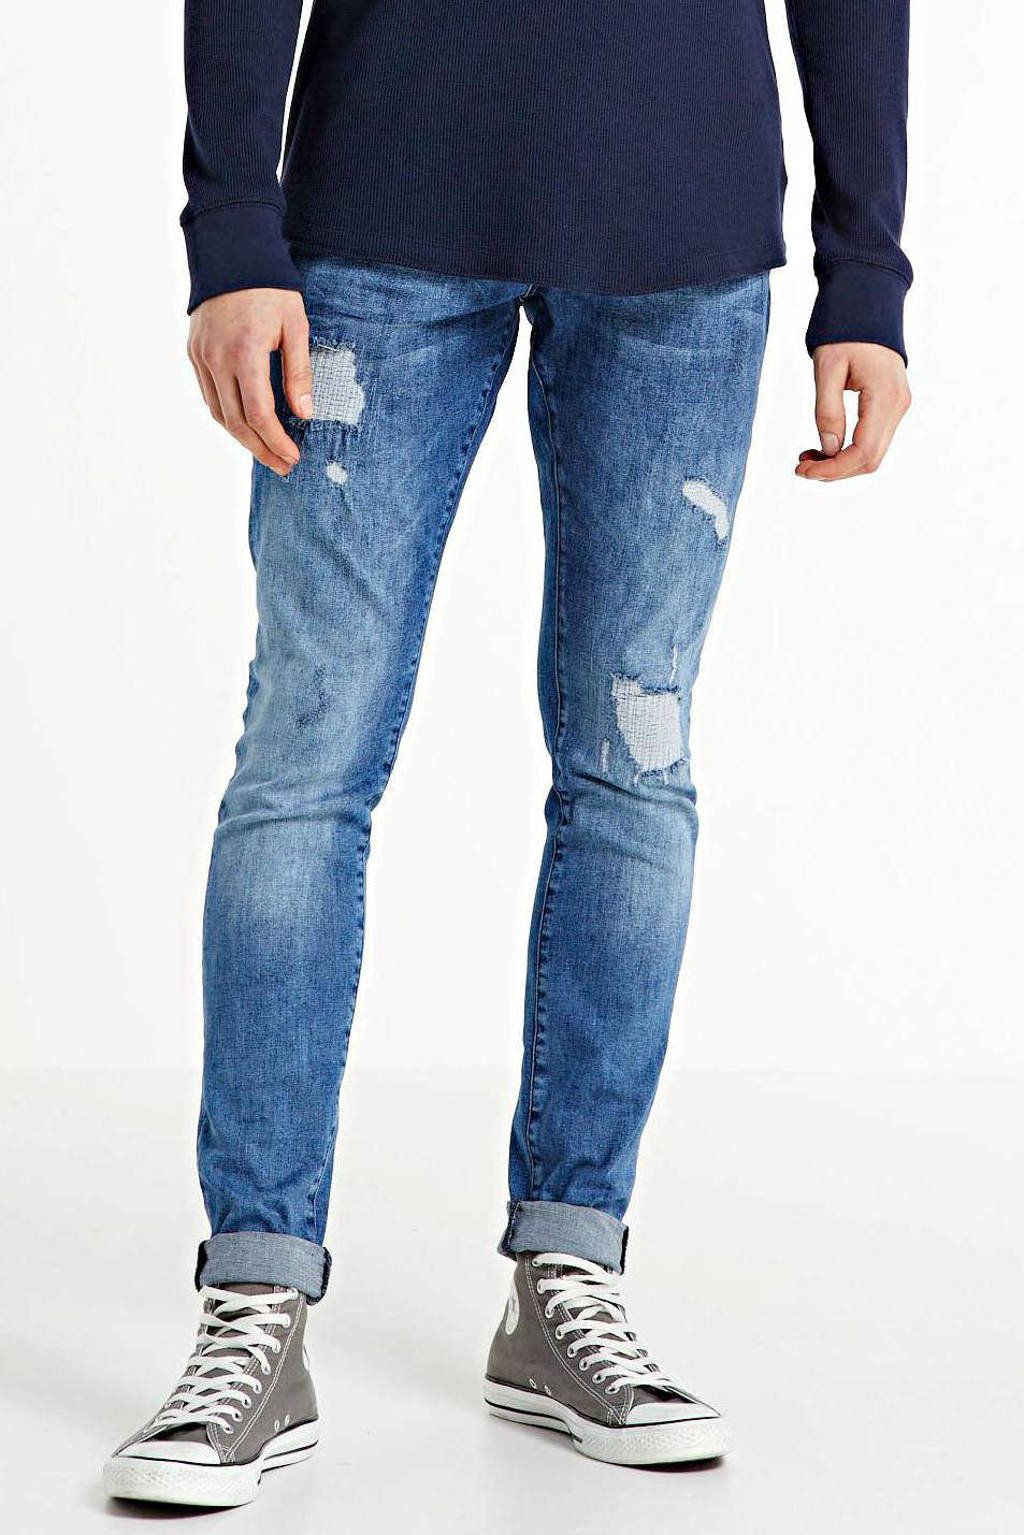 GABBIANO skinny jeans Ultimo Blue destroyed, Blue destroyed 